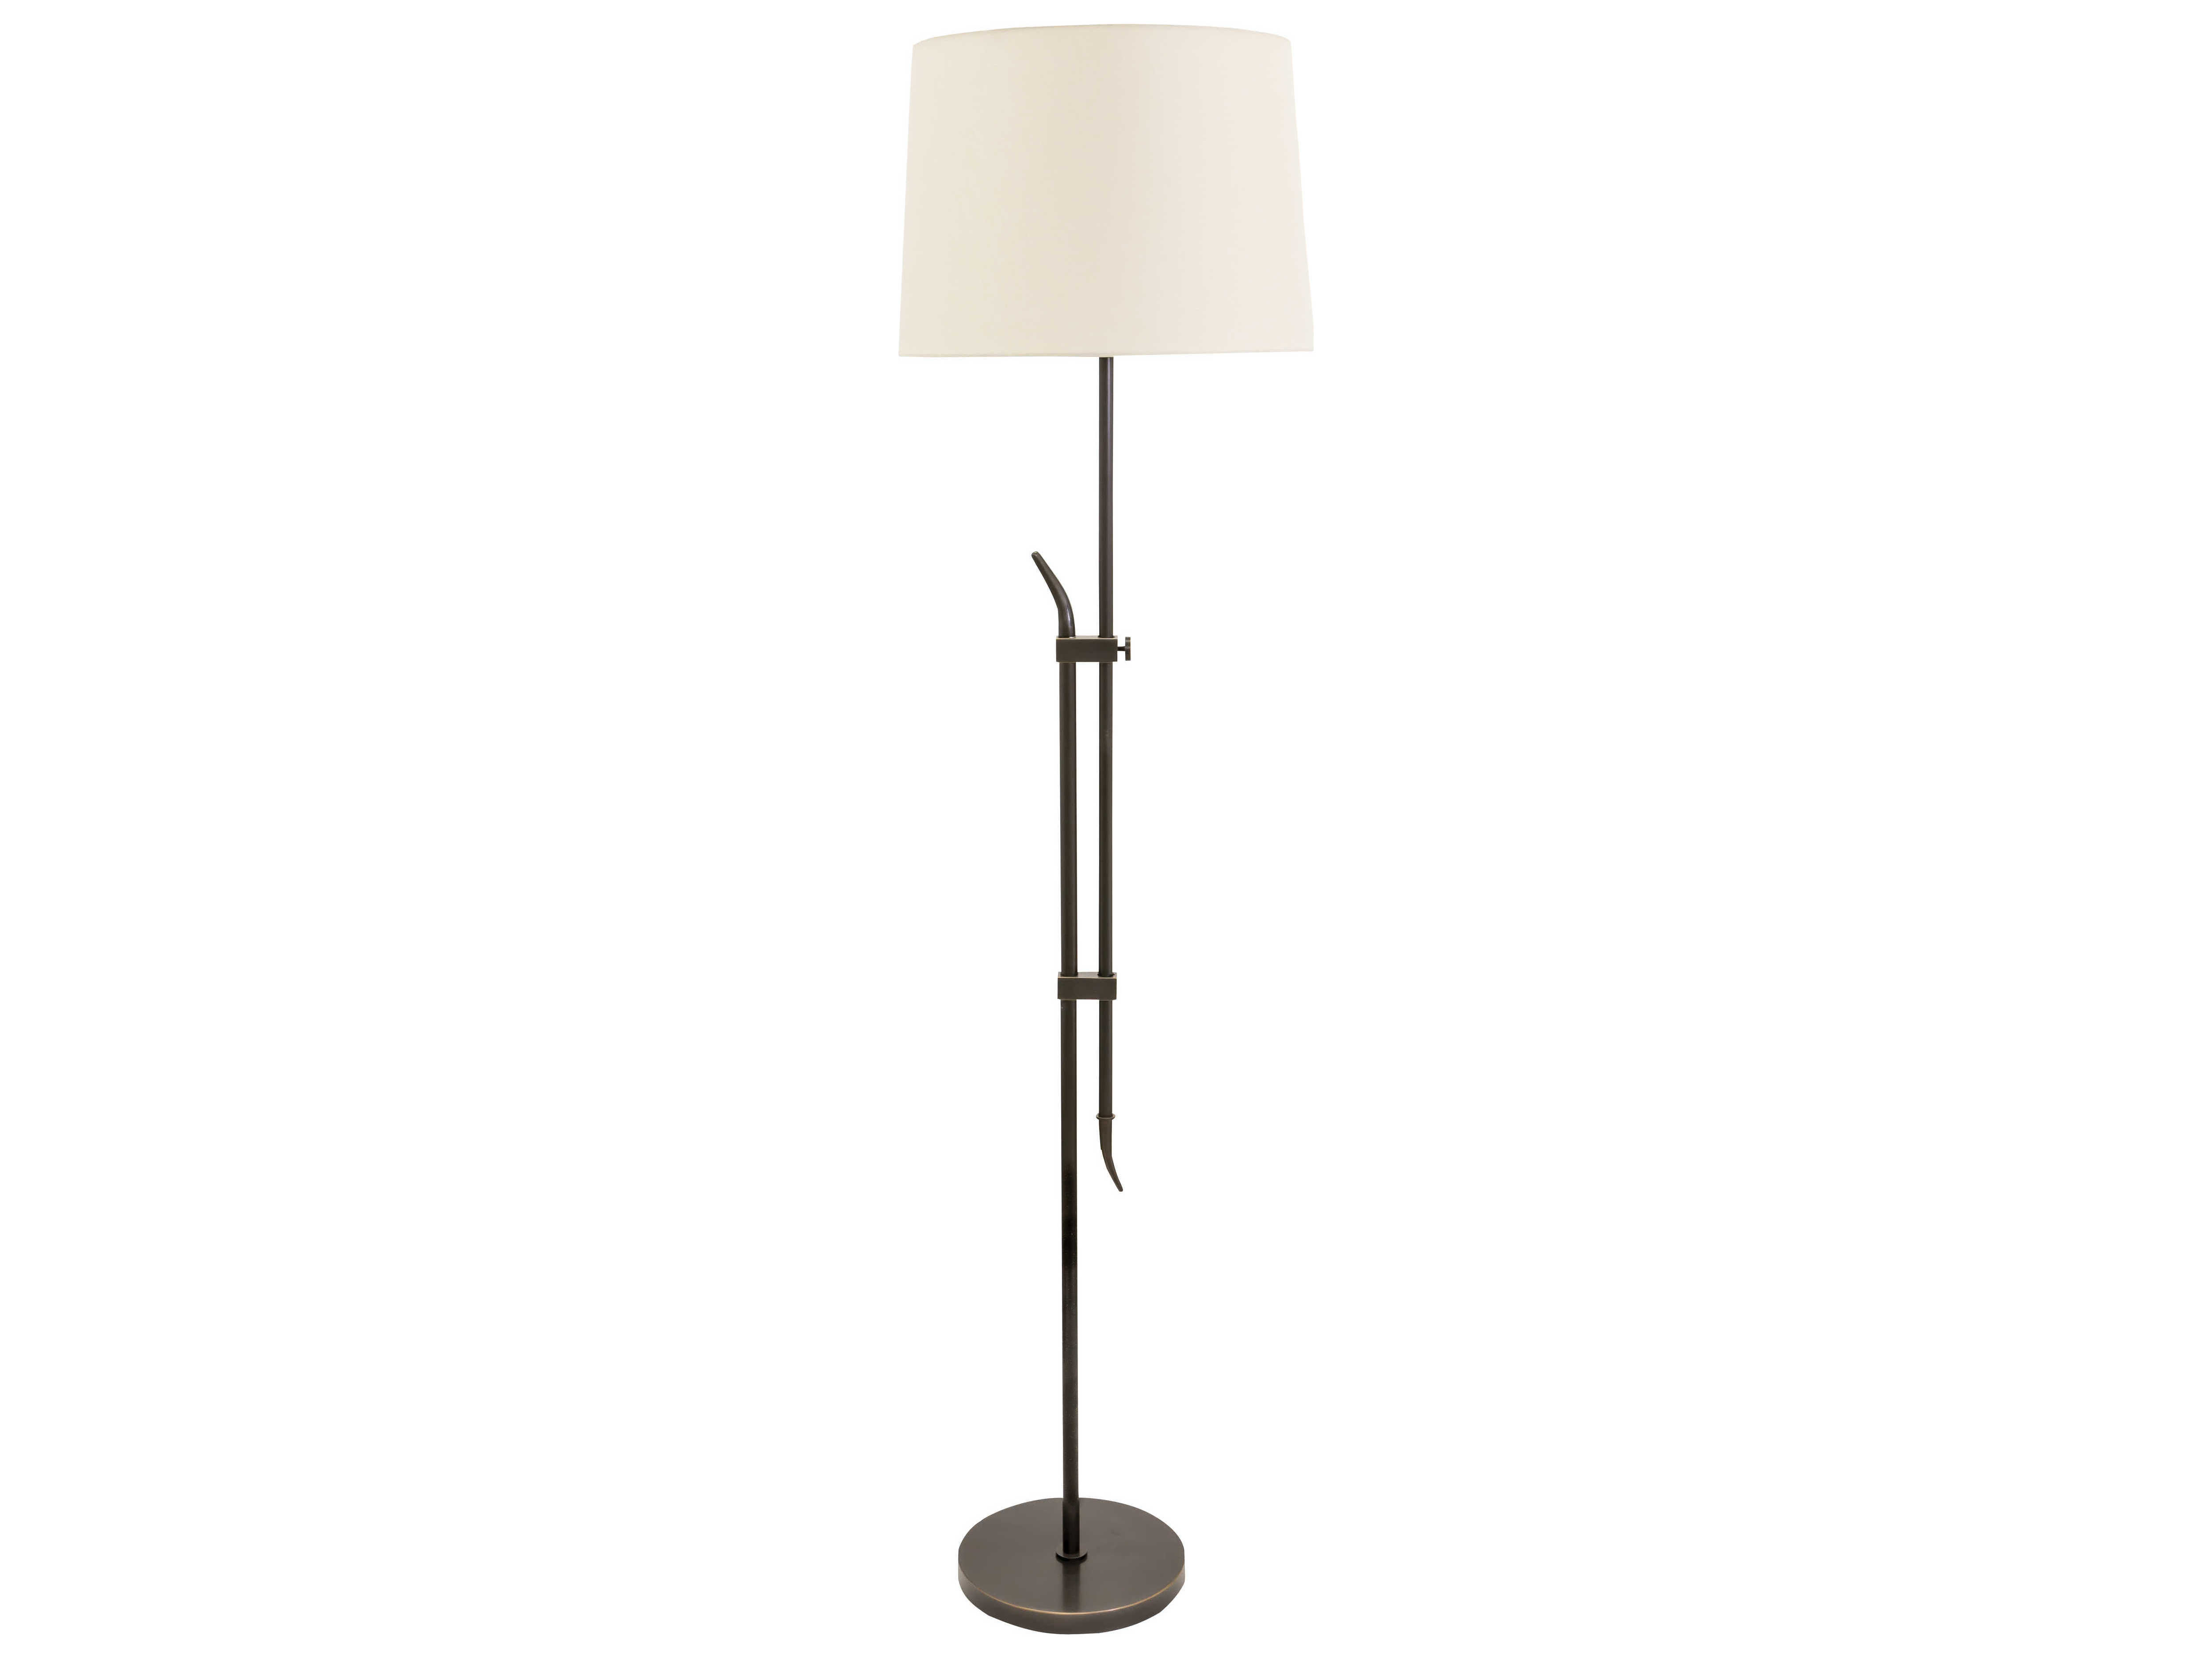 House Of Troy Windsor Oil Rubbed Bronze Adjustable Floor Lamp inside sizing 5003 X 3753